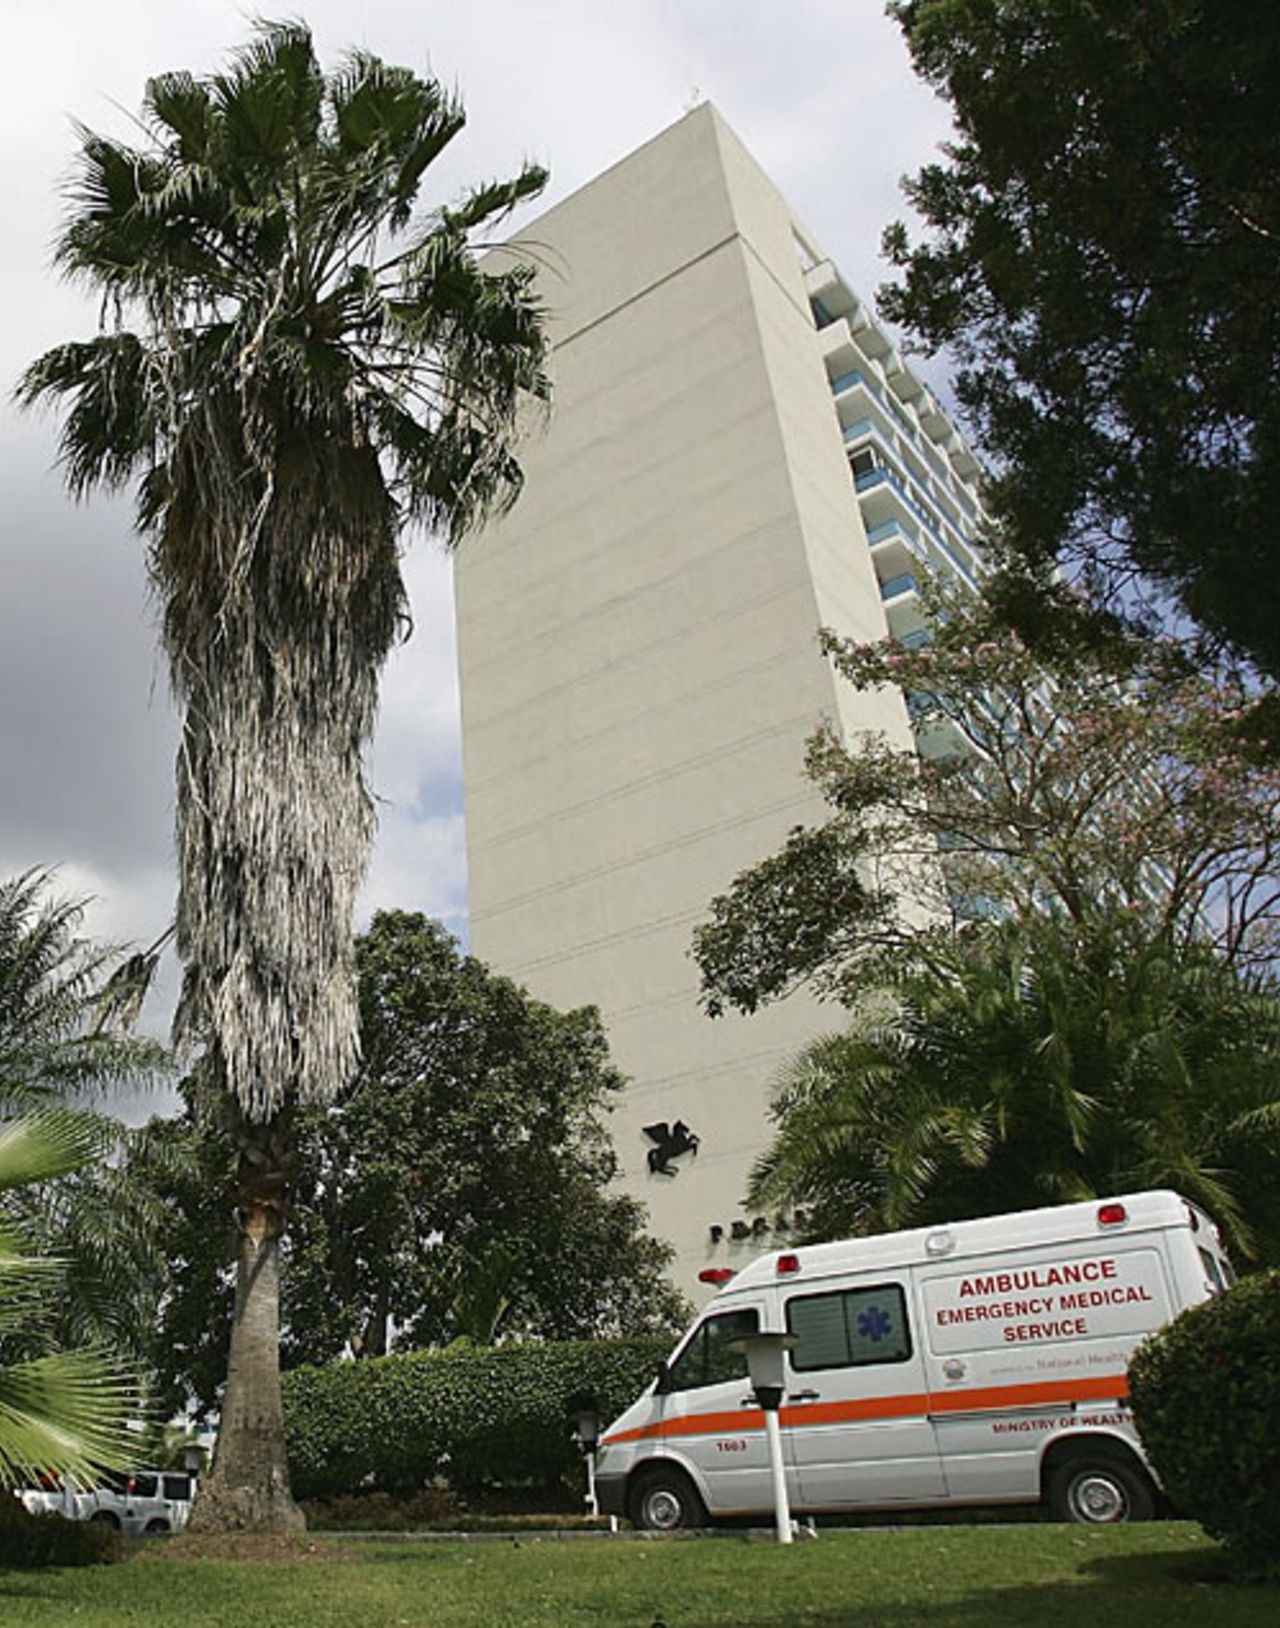 An ambulance is parked the Pakistan team hotel where Bob Woolmer was found unconscious in his hotel room, Kingston, Jamaica, March 18, 2007